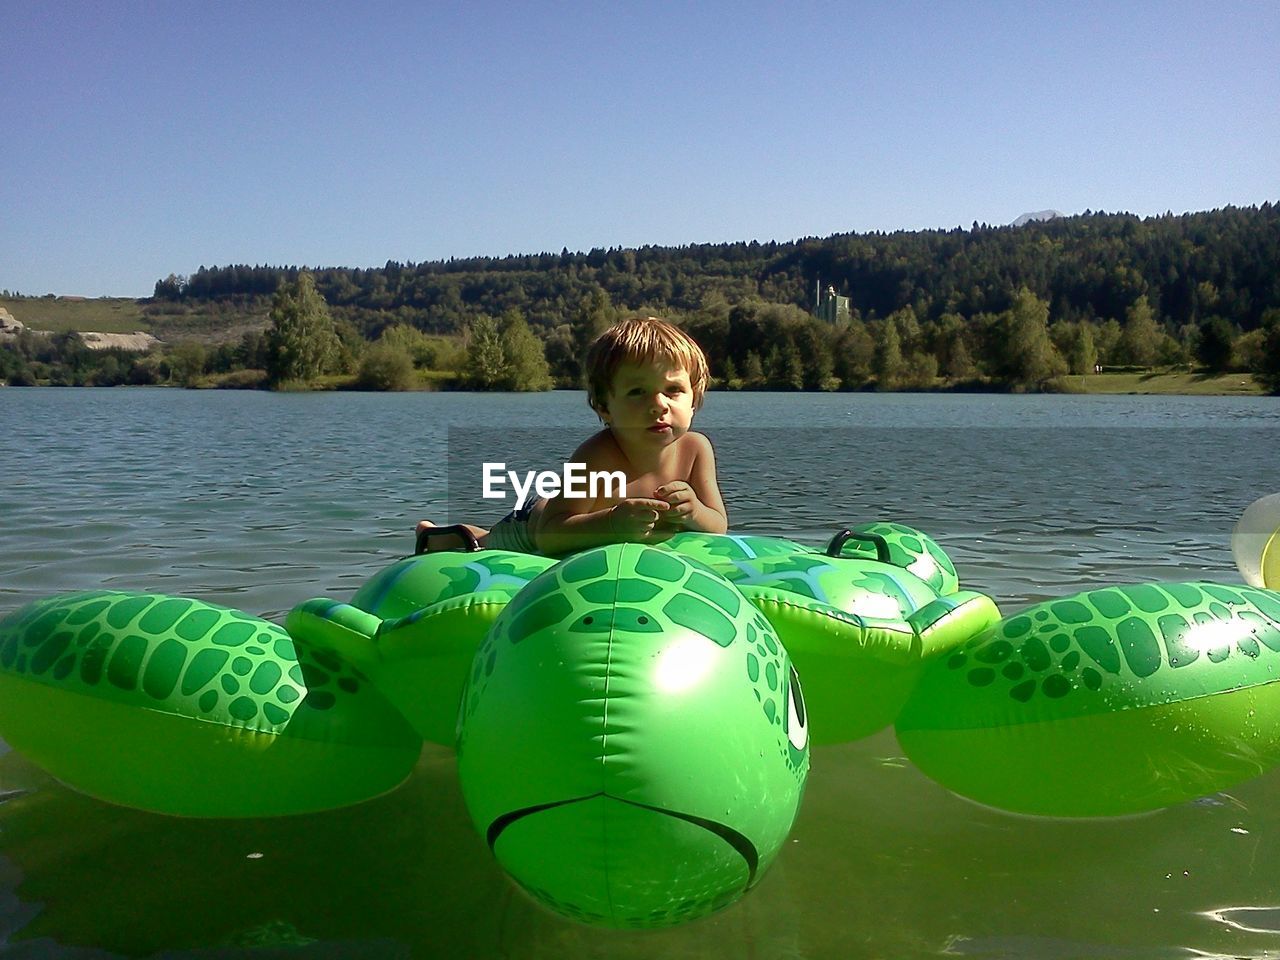 Portrait of boy relaxing on pool raft at lake against clear sky